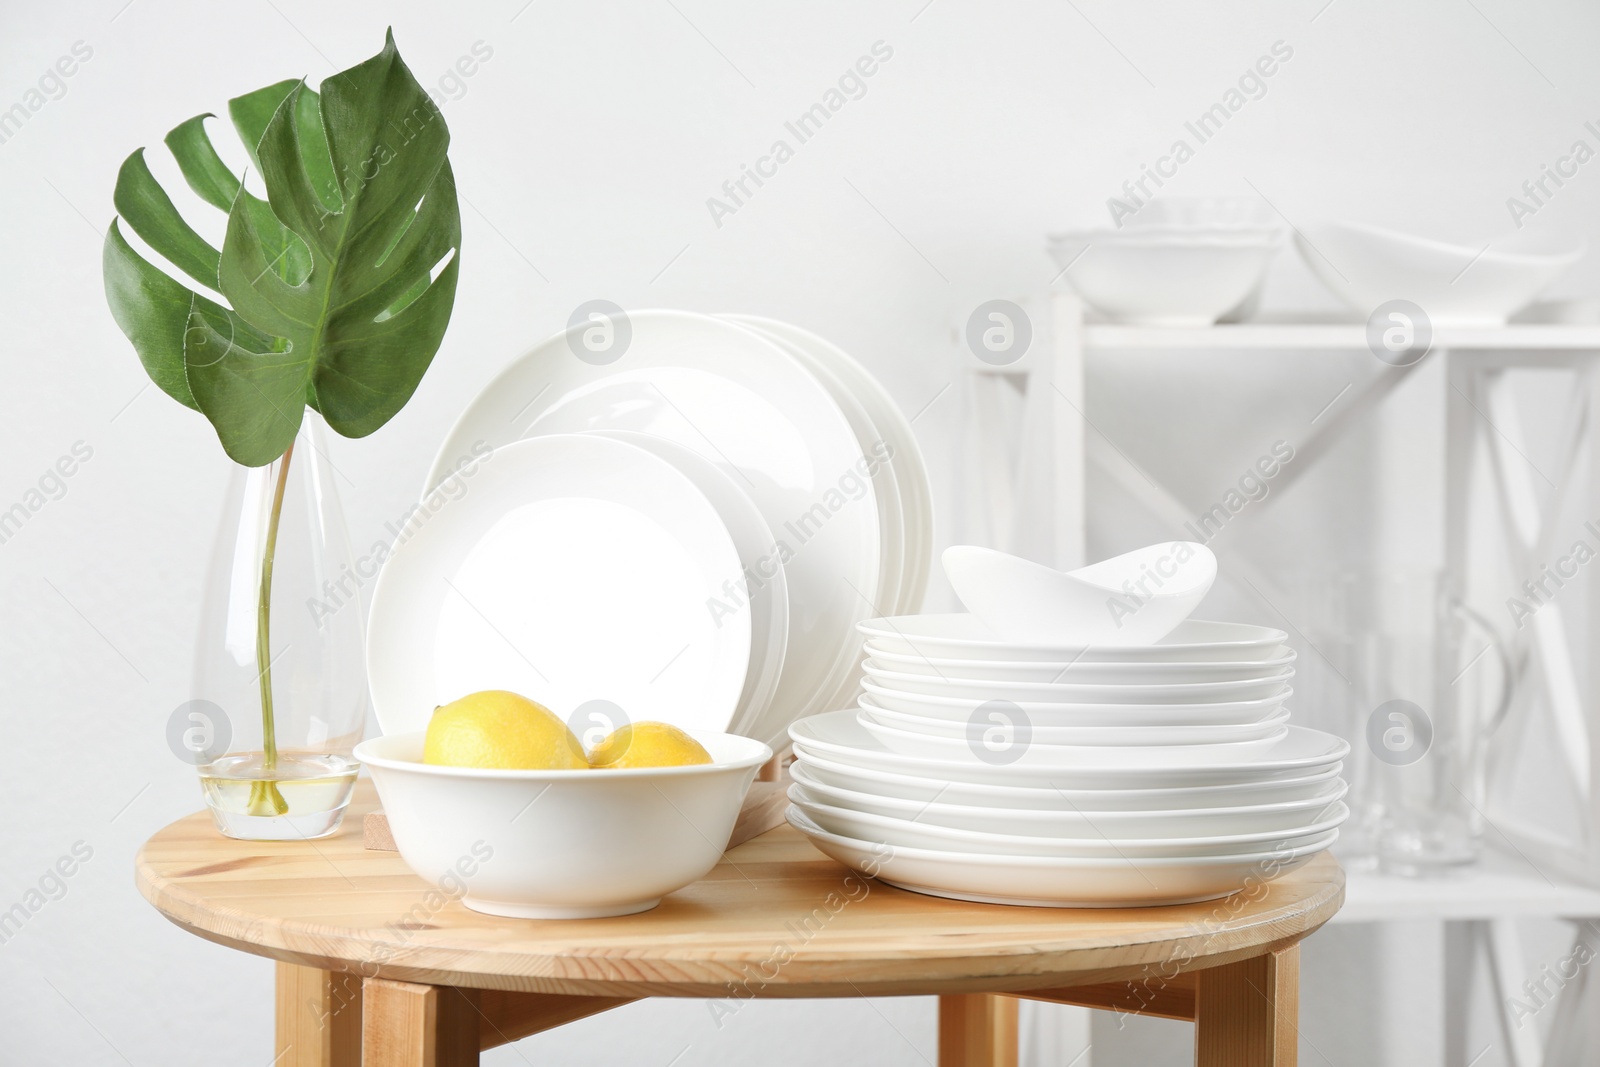 Photo of Different clean tableware on wooden table in kitchen